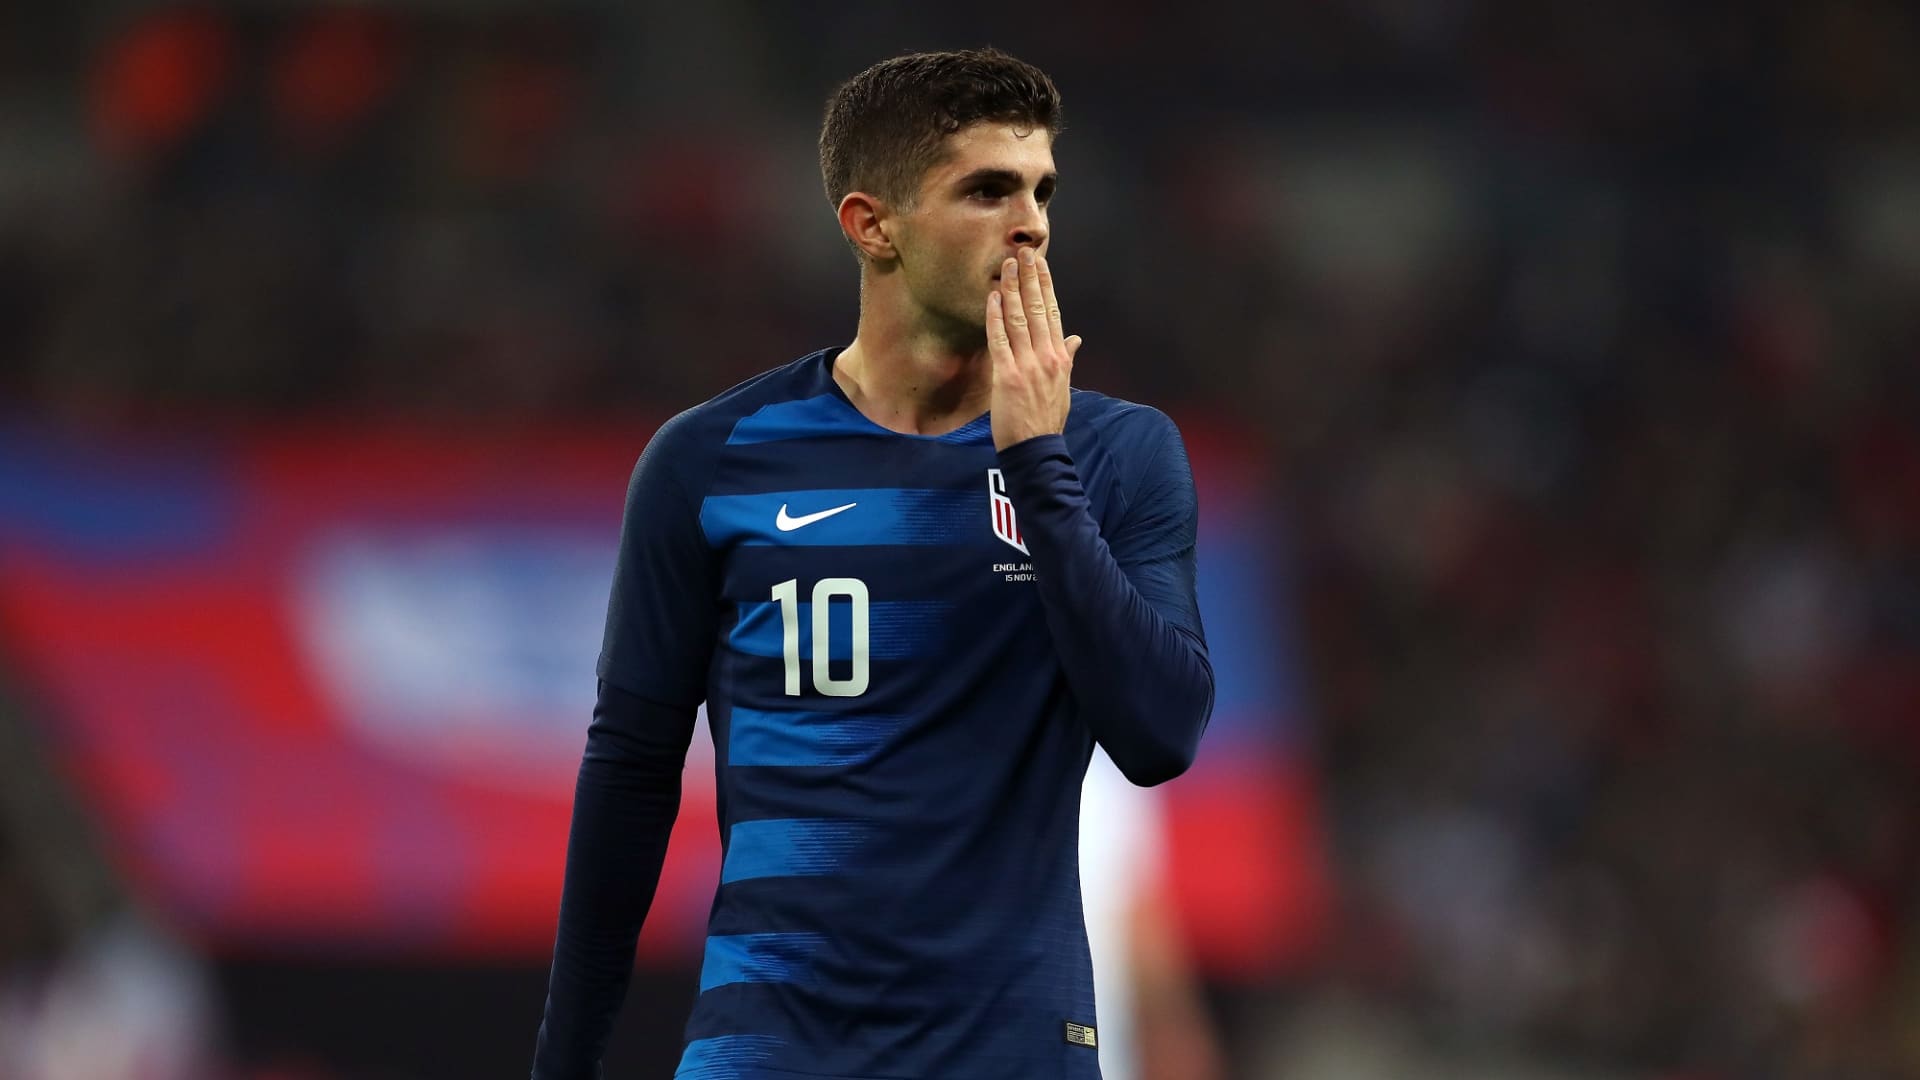 Will Christian Pulisic Be the Next Lionel Messi? Find Out If He's Destined for Greatness! 16